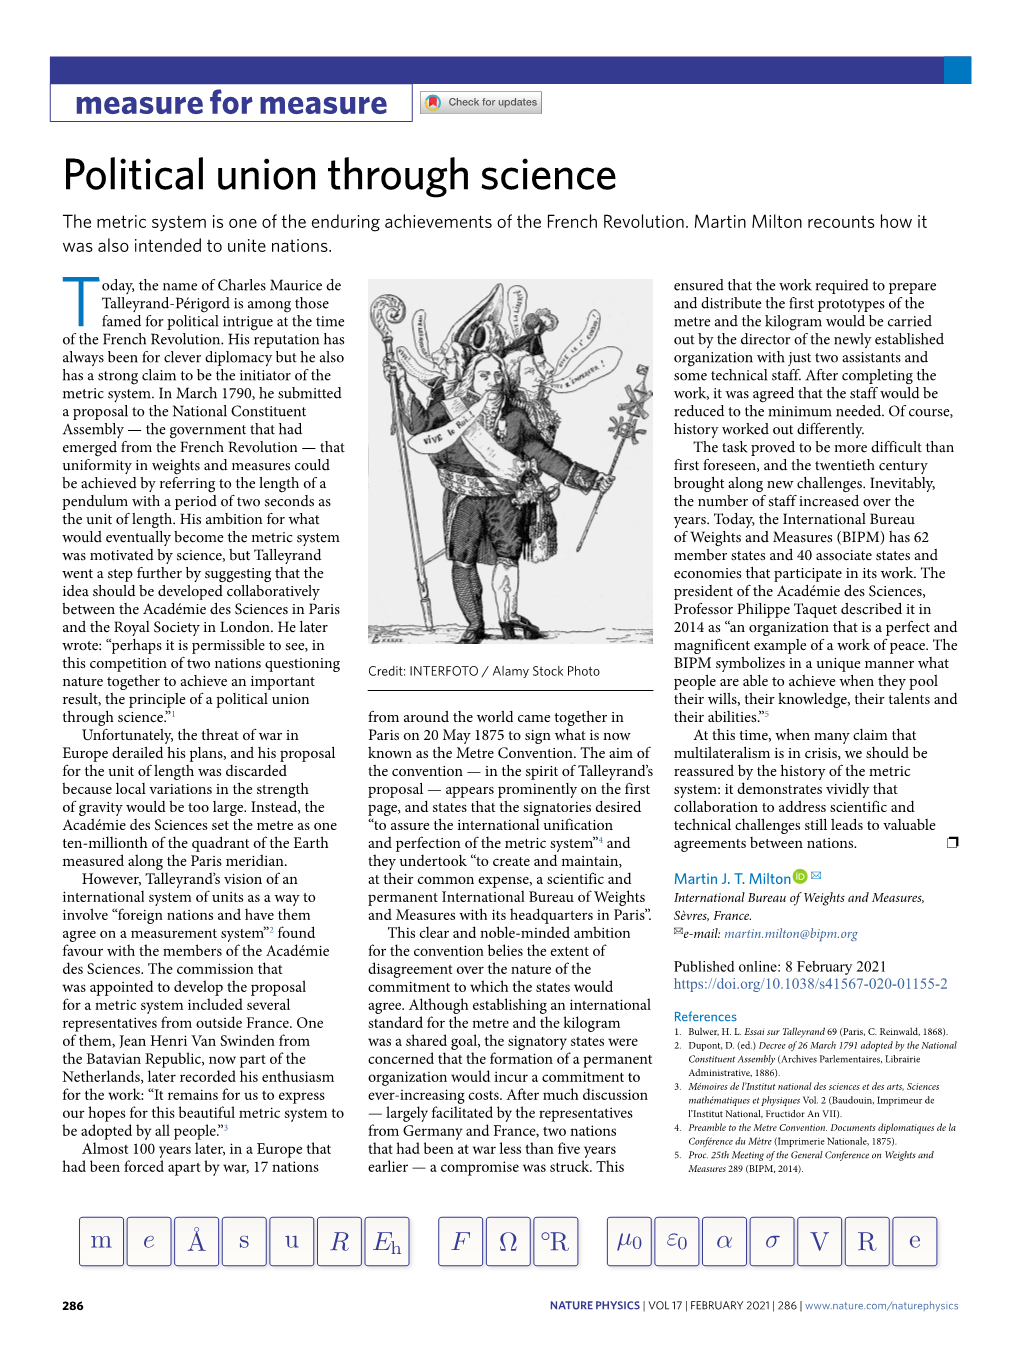 Political Union Through Science the Metric System Is One of the Enduring Achievements of the French Revolution